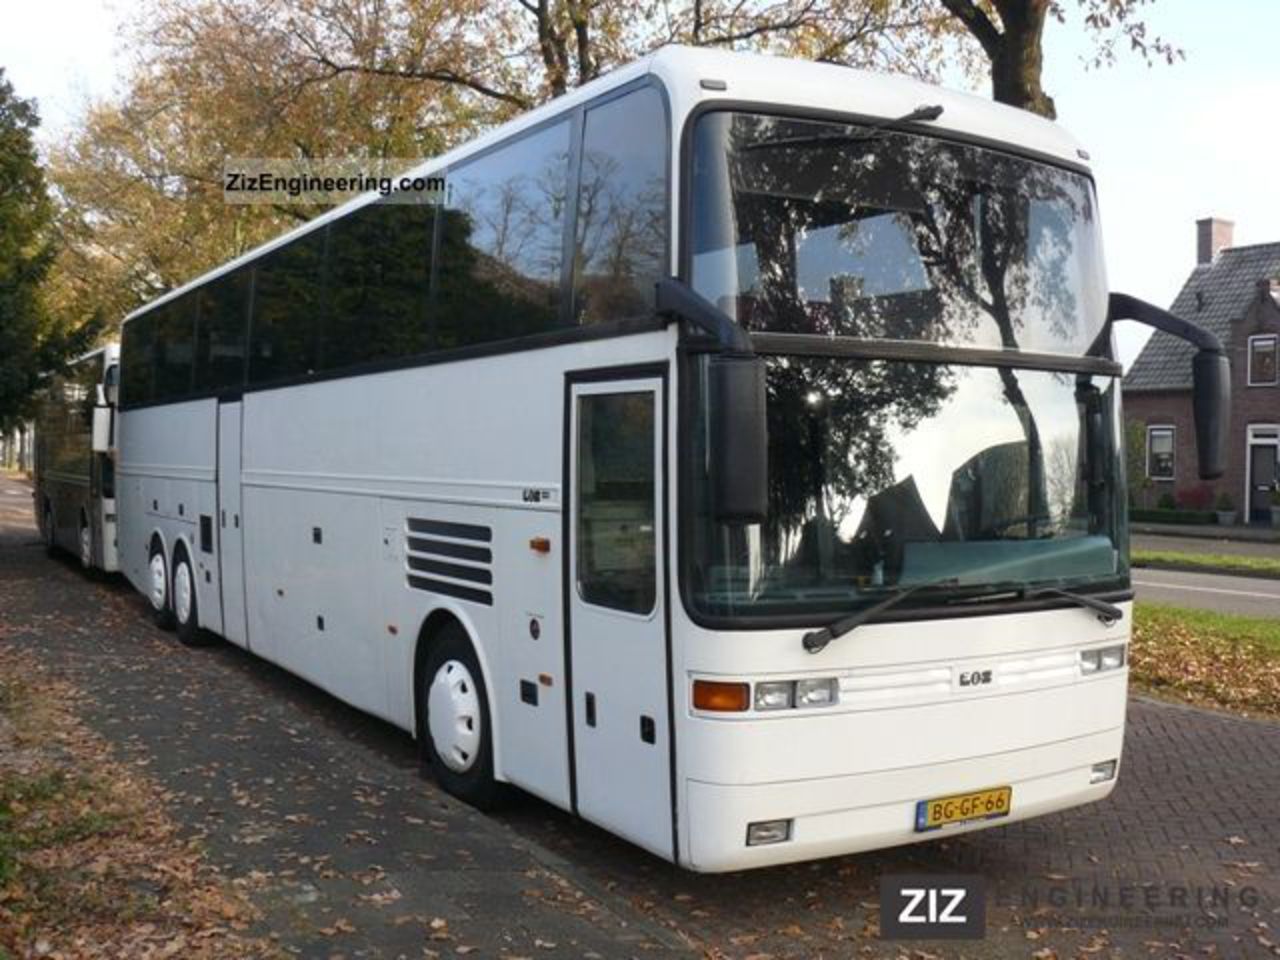 VanHool EOS 233 Photo Gallery: Photo #09 out of 9, Image Size ...